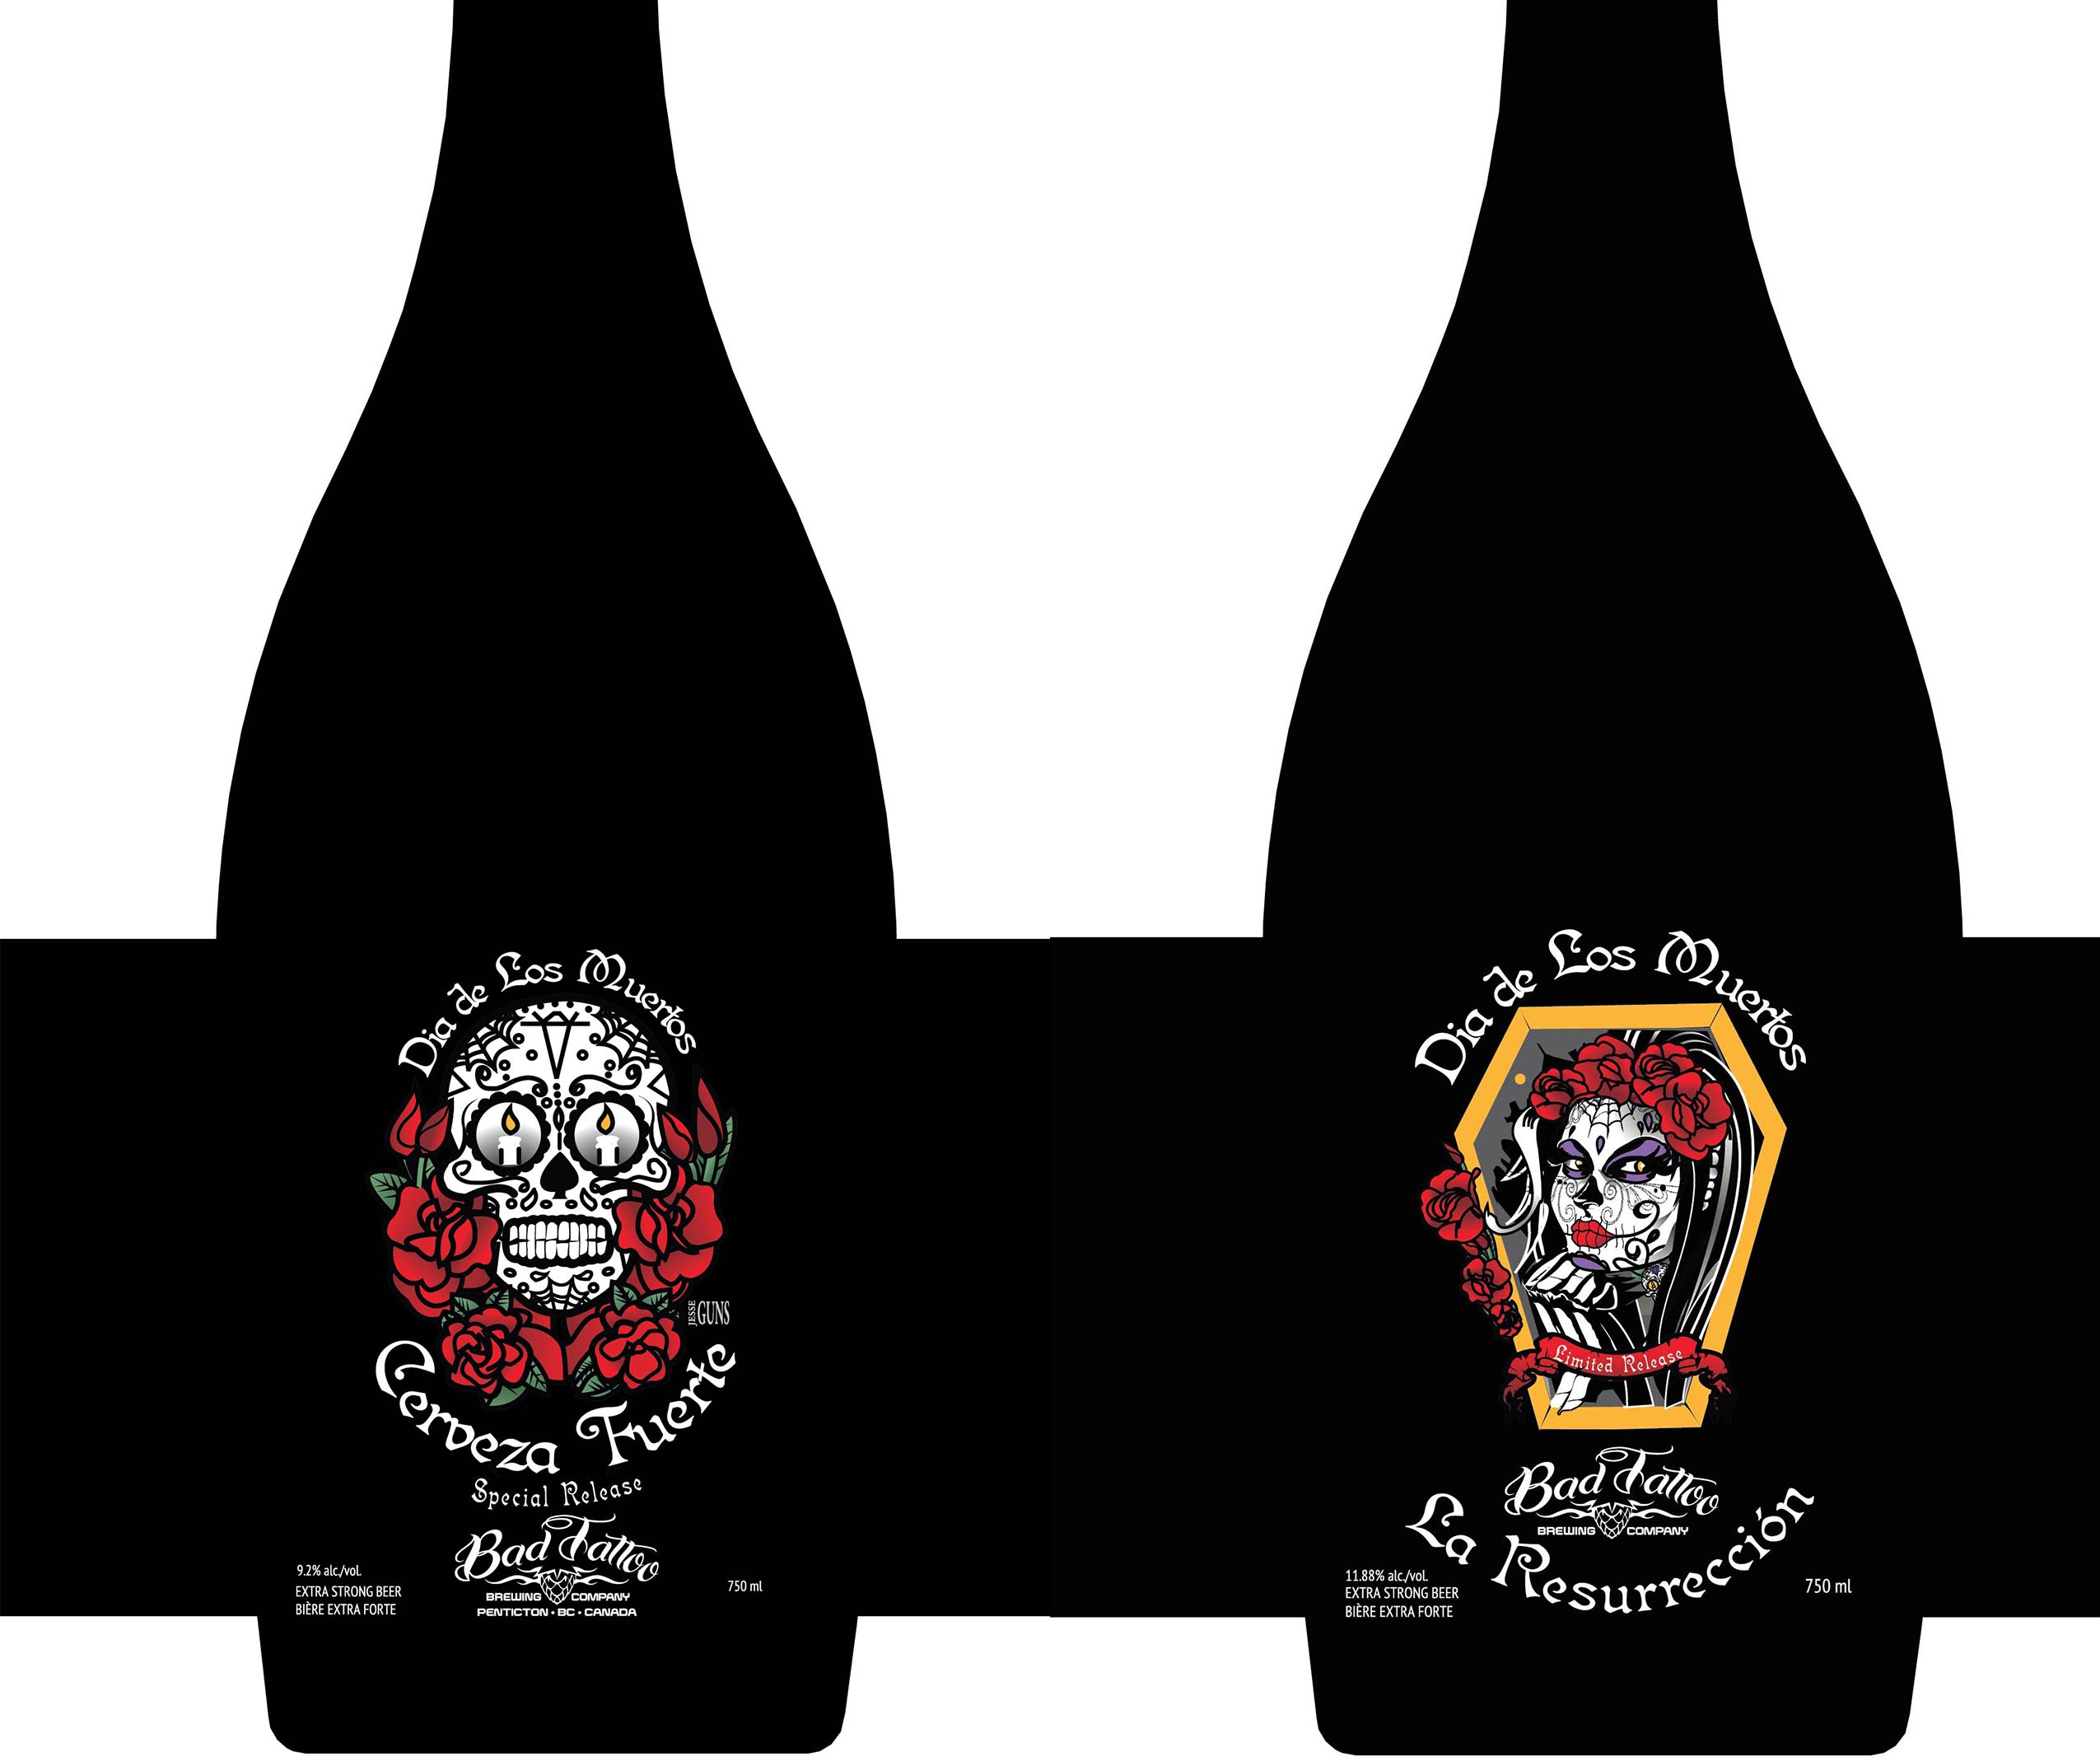 New Beers for release at Bad Tattoo on Nov 1, 2015